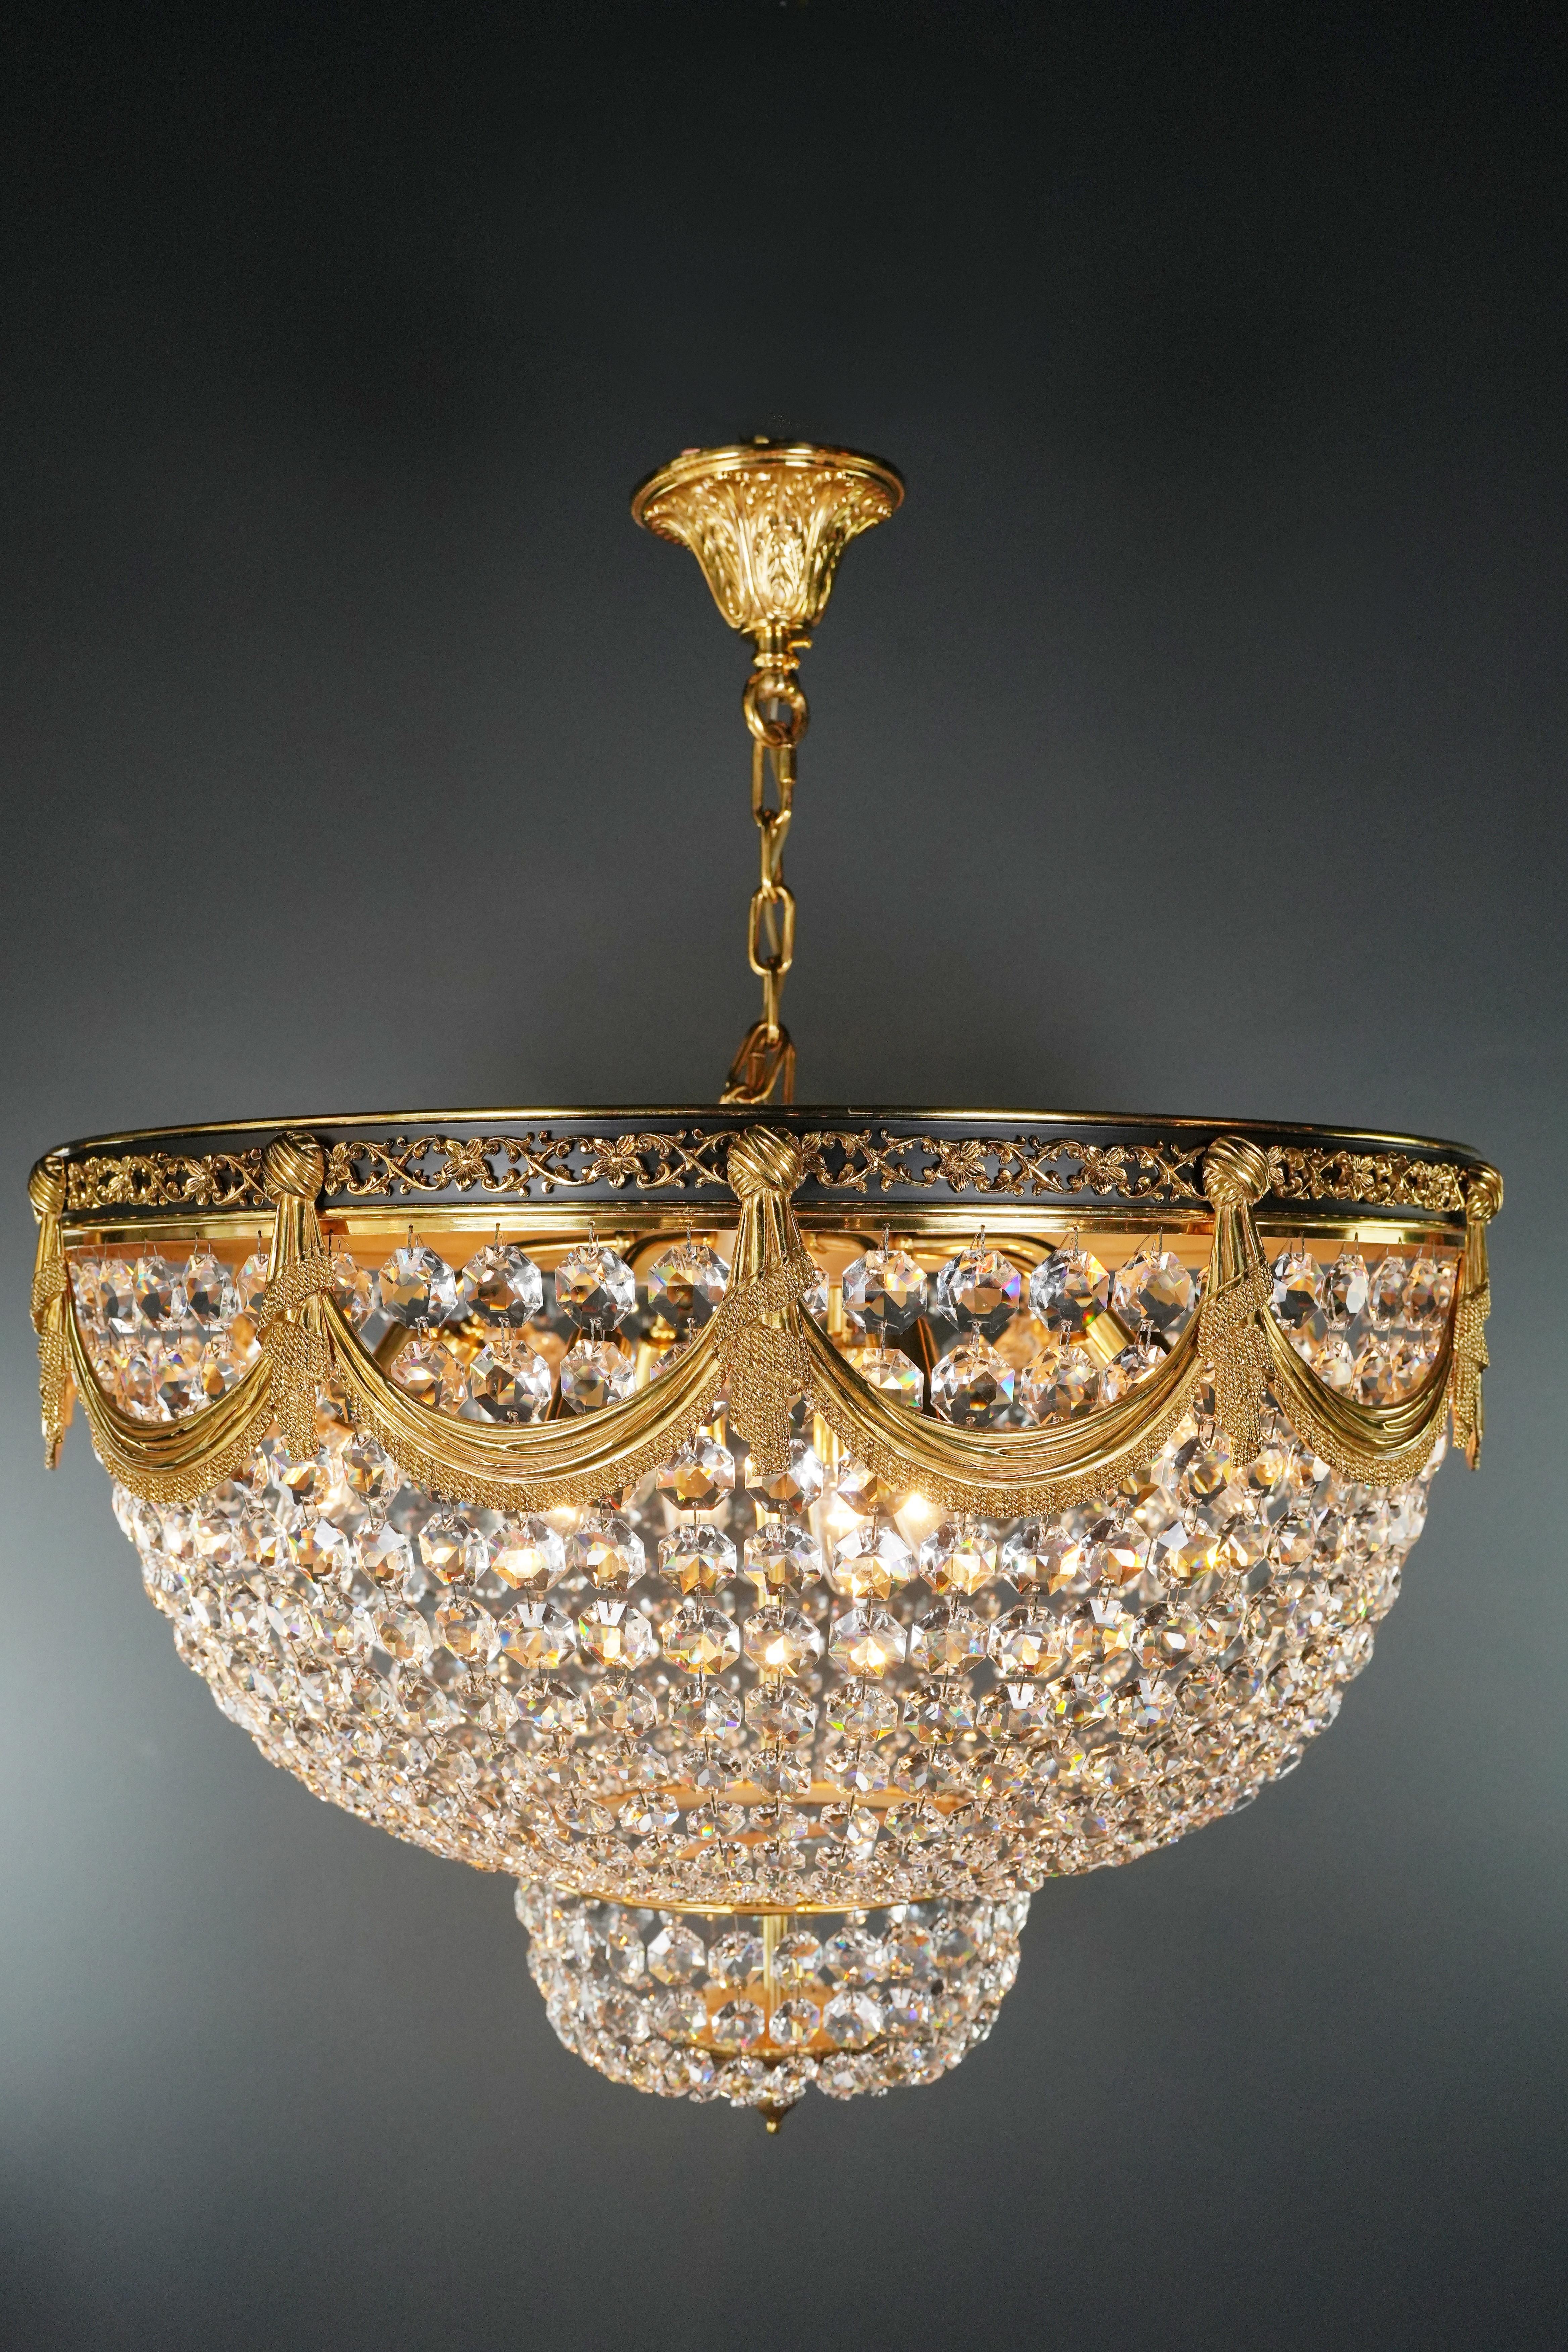 The brass Plafonnier chandelier is a testament to opulence and craftsmanship. We manufacture in-house and offer the flexibility of both smaller and larger sizes to ensure the perfect fit for your space.

Key Features:
- Dimensions: diameter 70 cm,